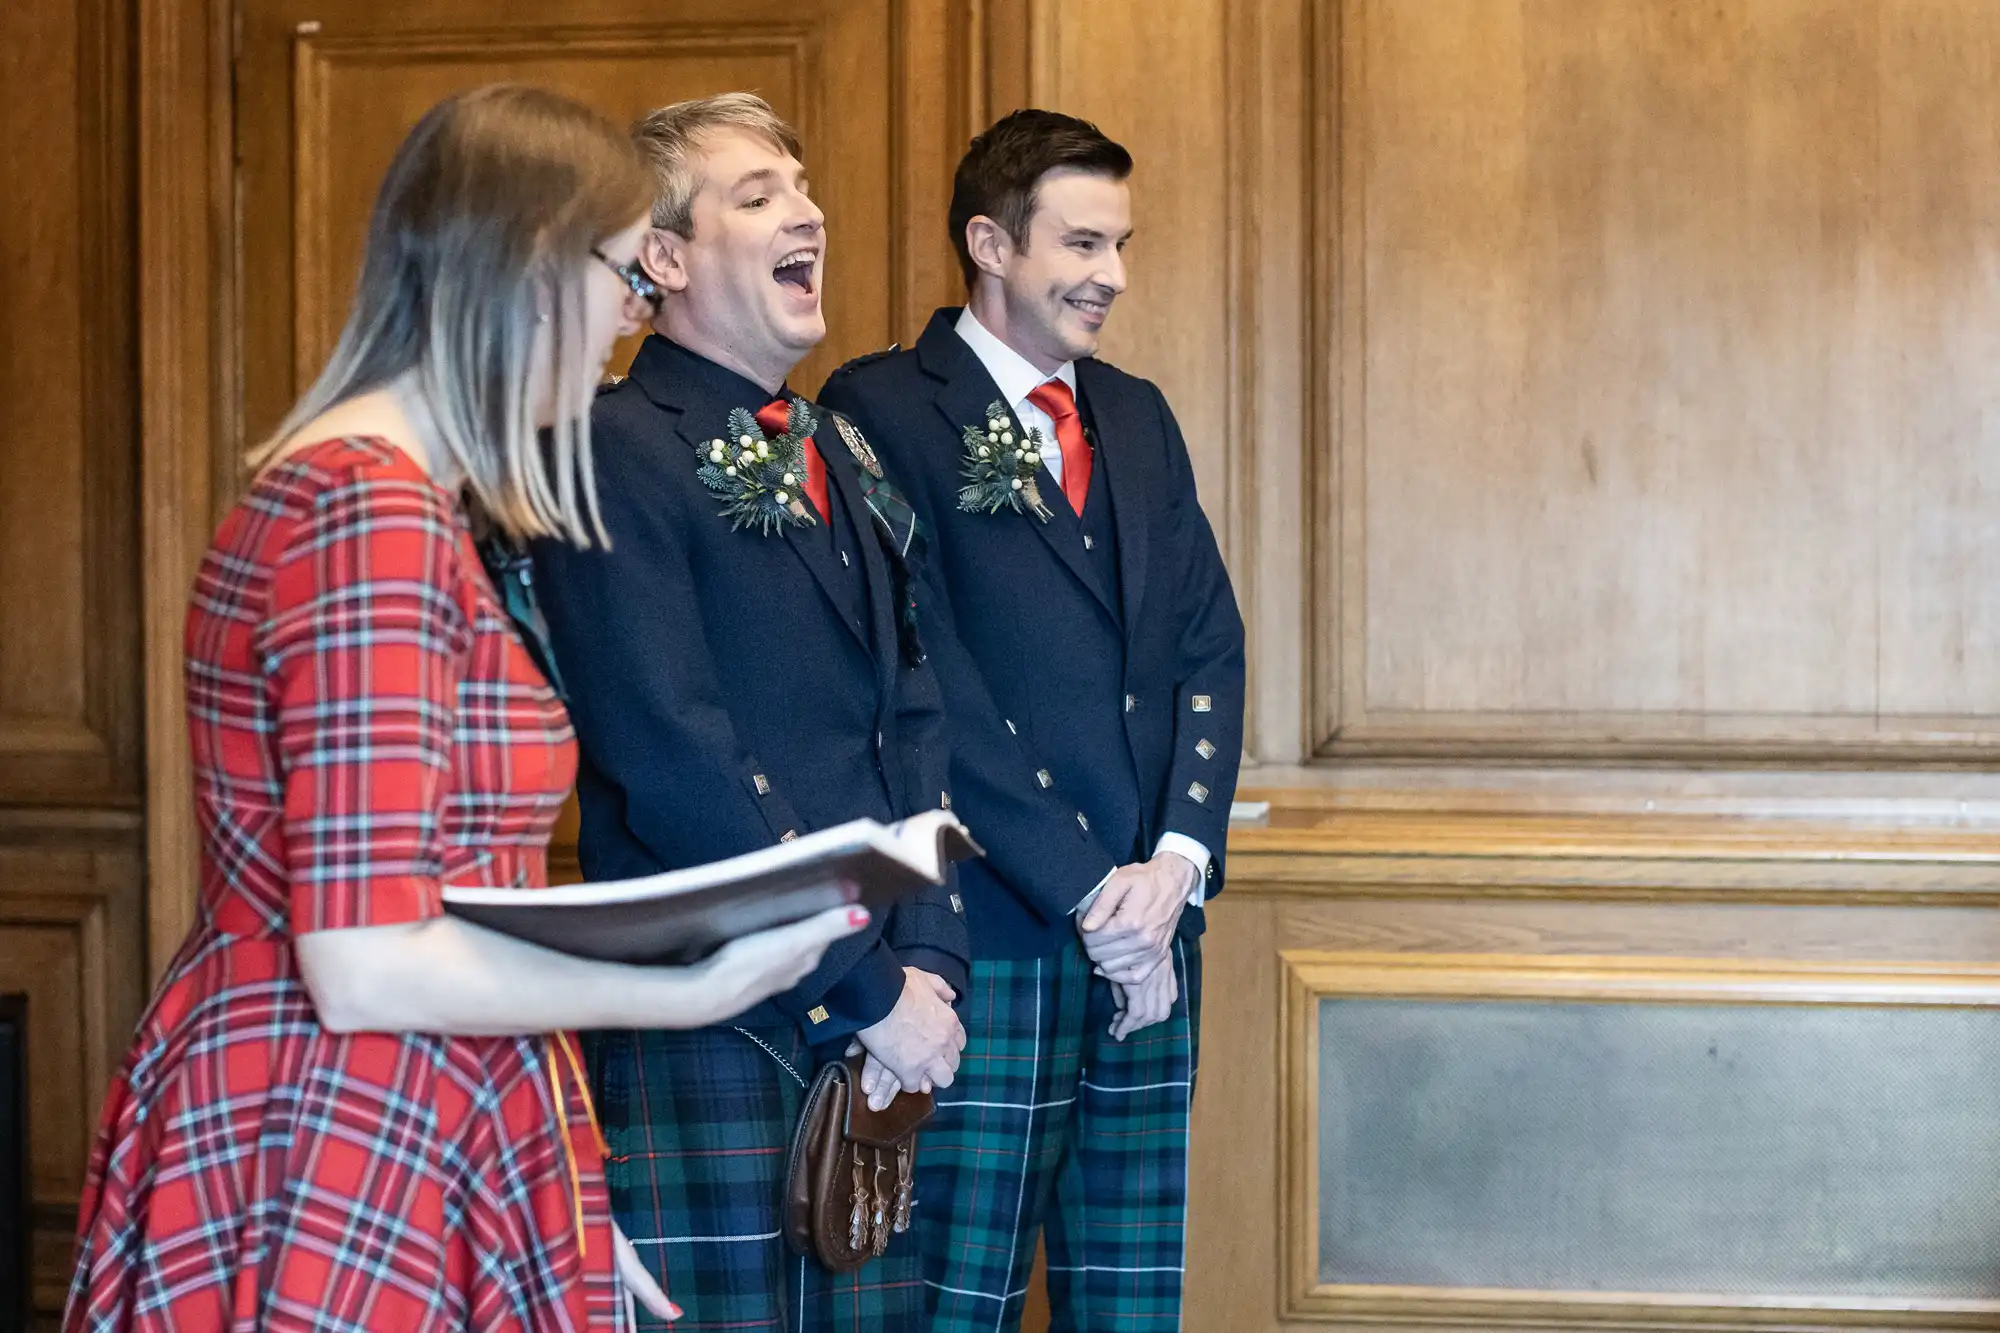 Two grooms in matching plaid kilts and blazers stand next to a woman reading from a book in a wood-paneled room. One groom is laughing heartily.